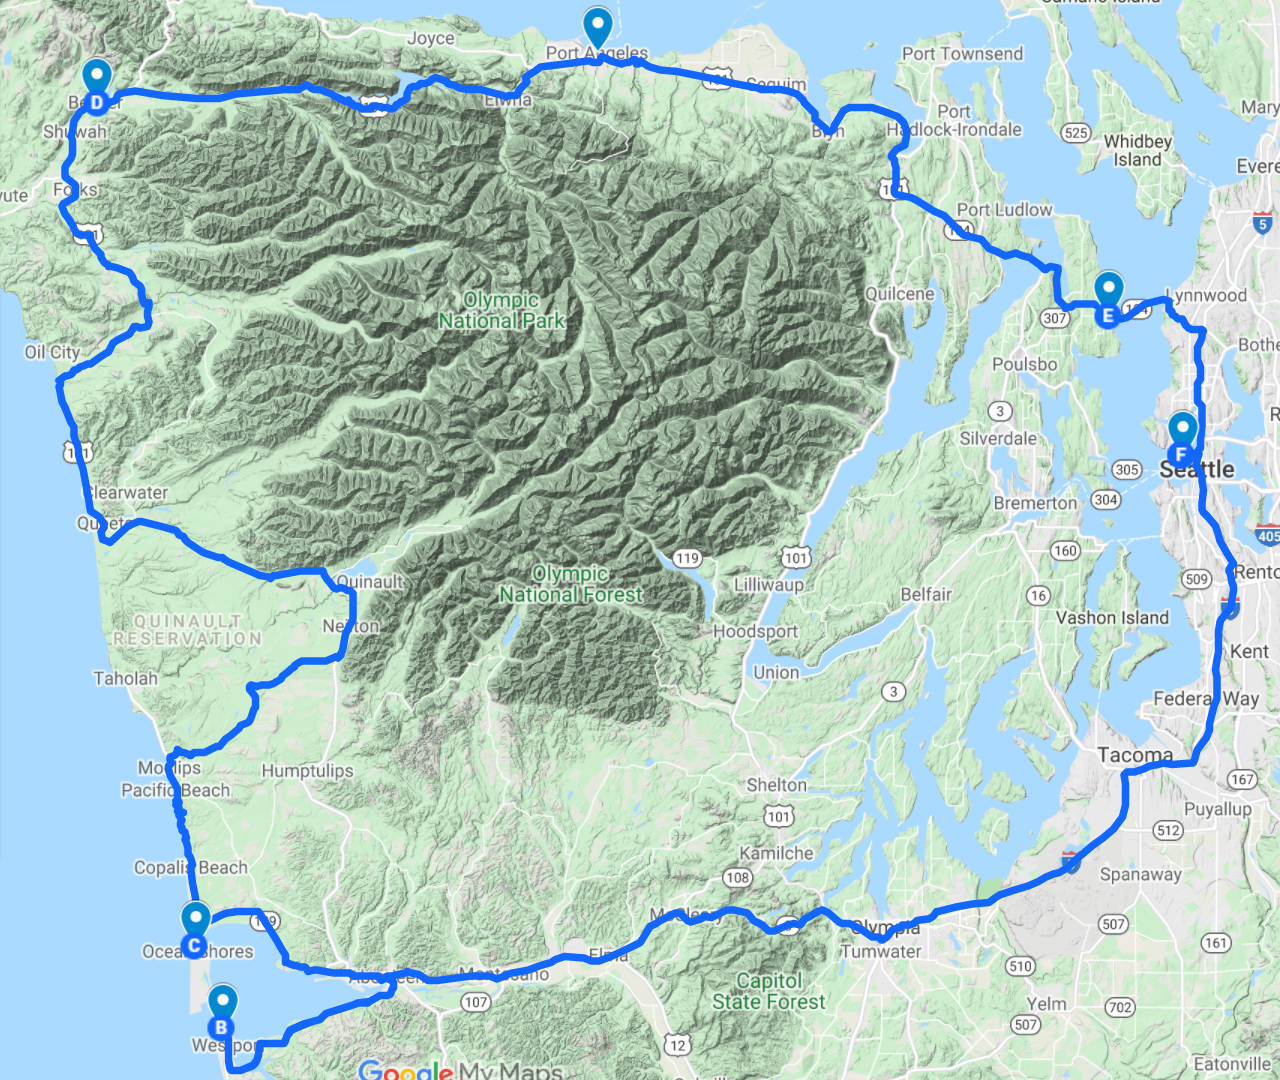 My route: Seattle (A/F) to Ocean Shores (C) with a detour to Westport (B) on day one. Then up the coast, around the Olympics to the Kingston Ferry (E) and home on day 2..